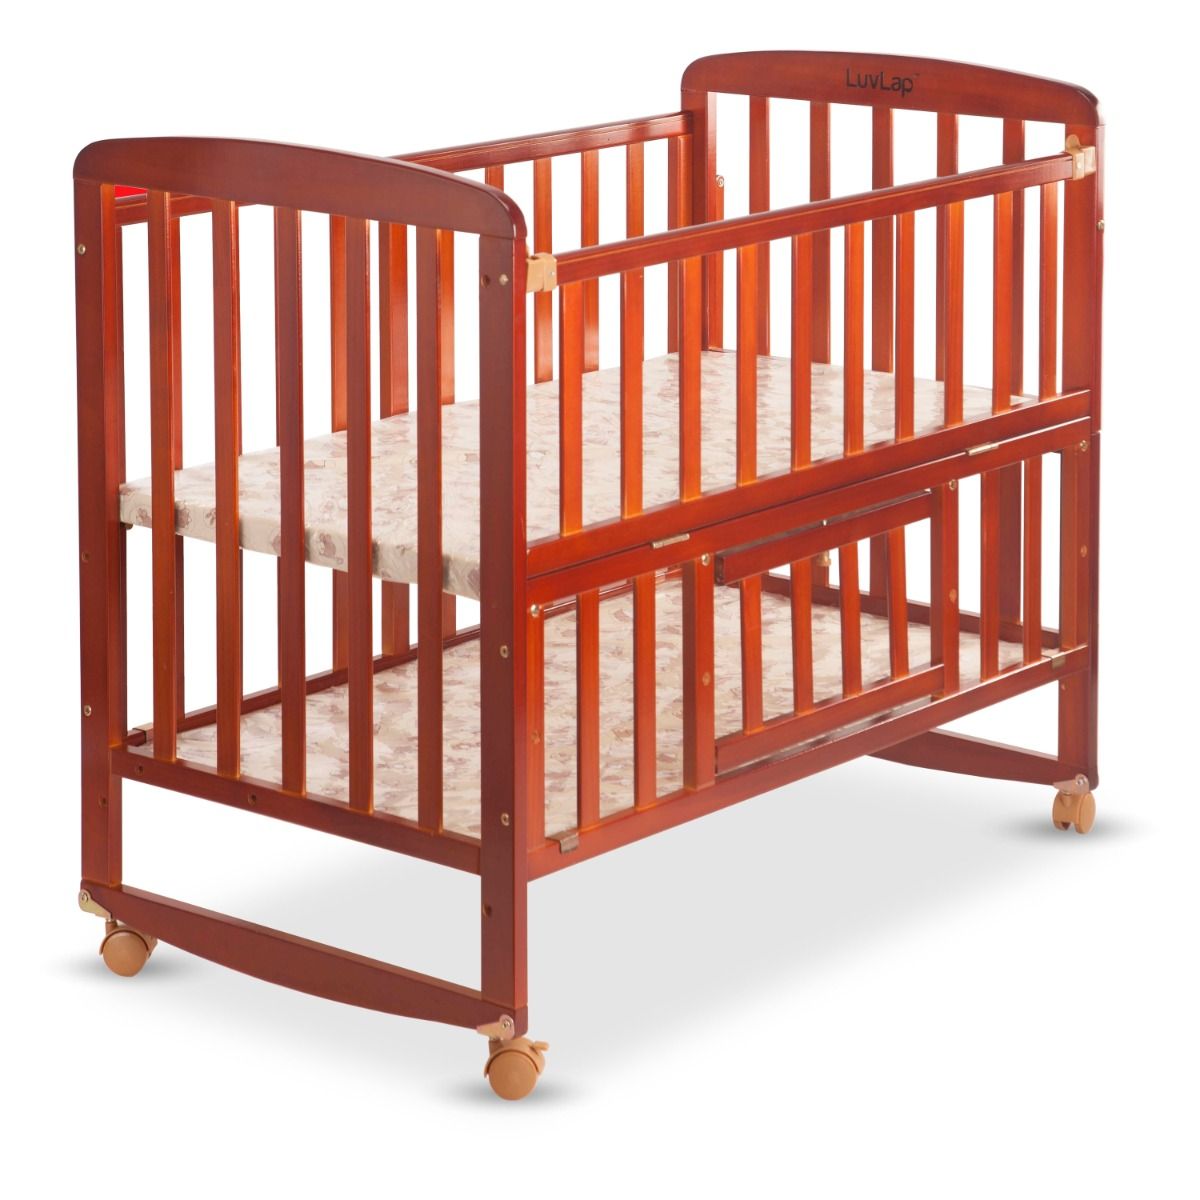 LuvLap Baby Wooden Cot C-50, Cherry Red